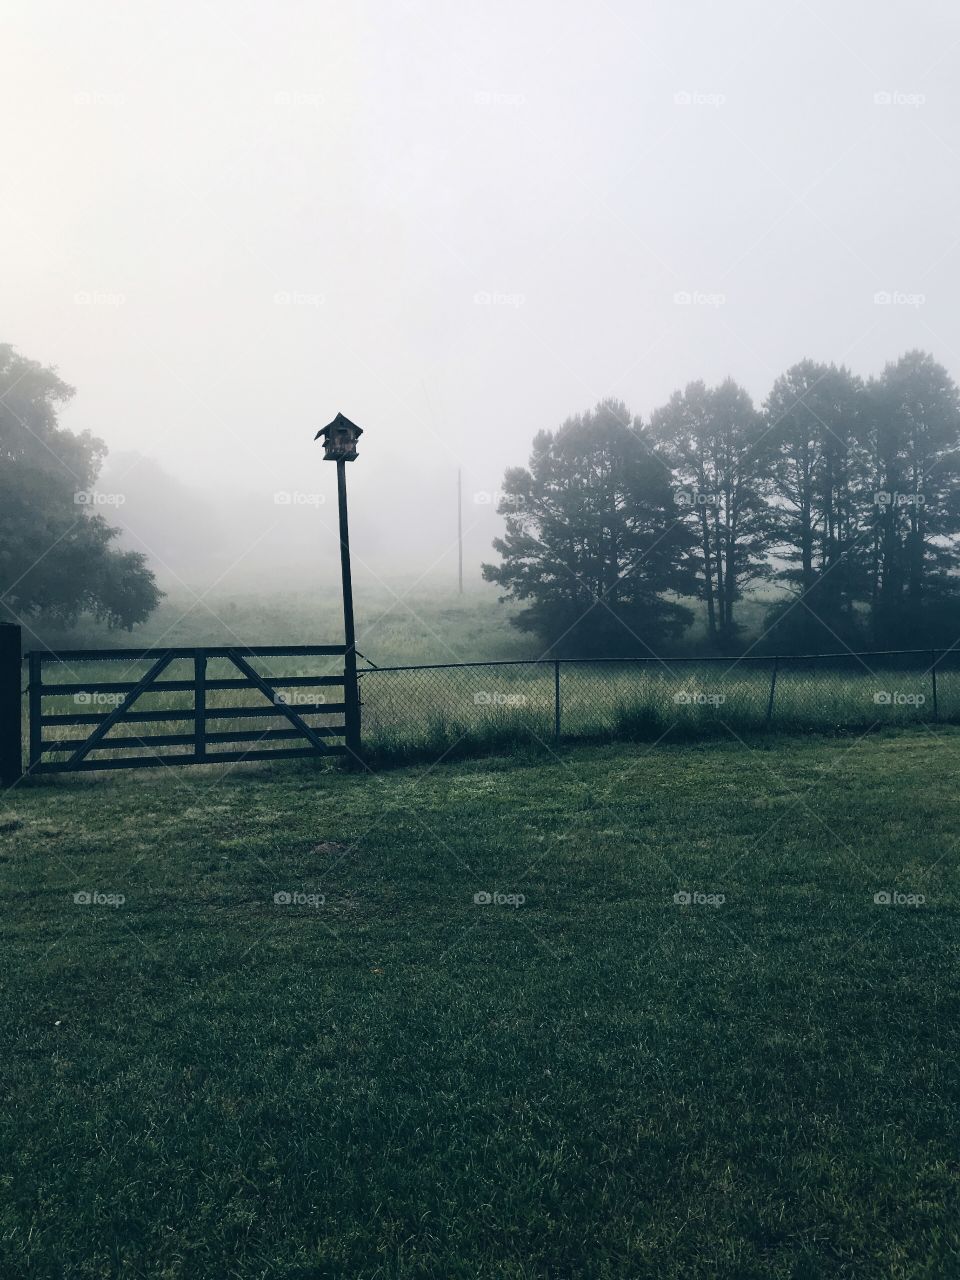 Country nature scene, field with trees, gate, fence, birdhouse, green grass, dense fog